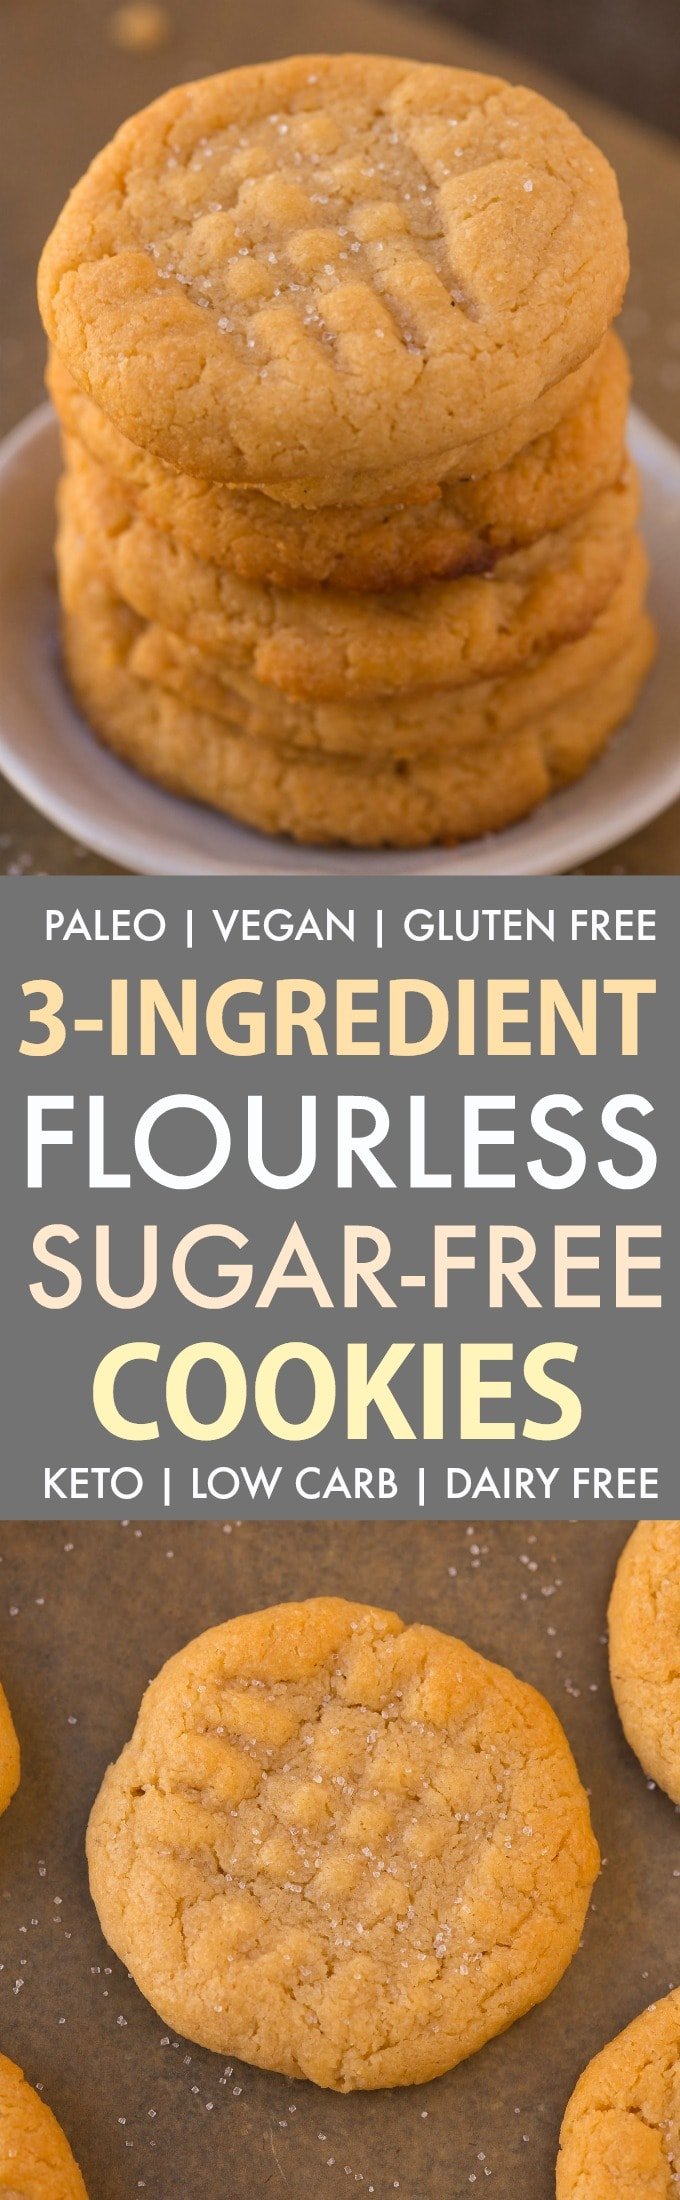 A collage of flourless sugar free peanut butter cookies made eggless